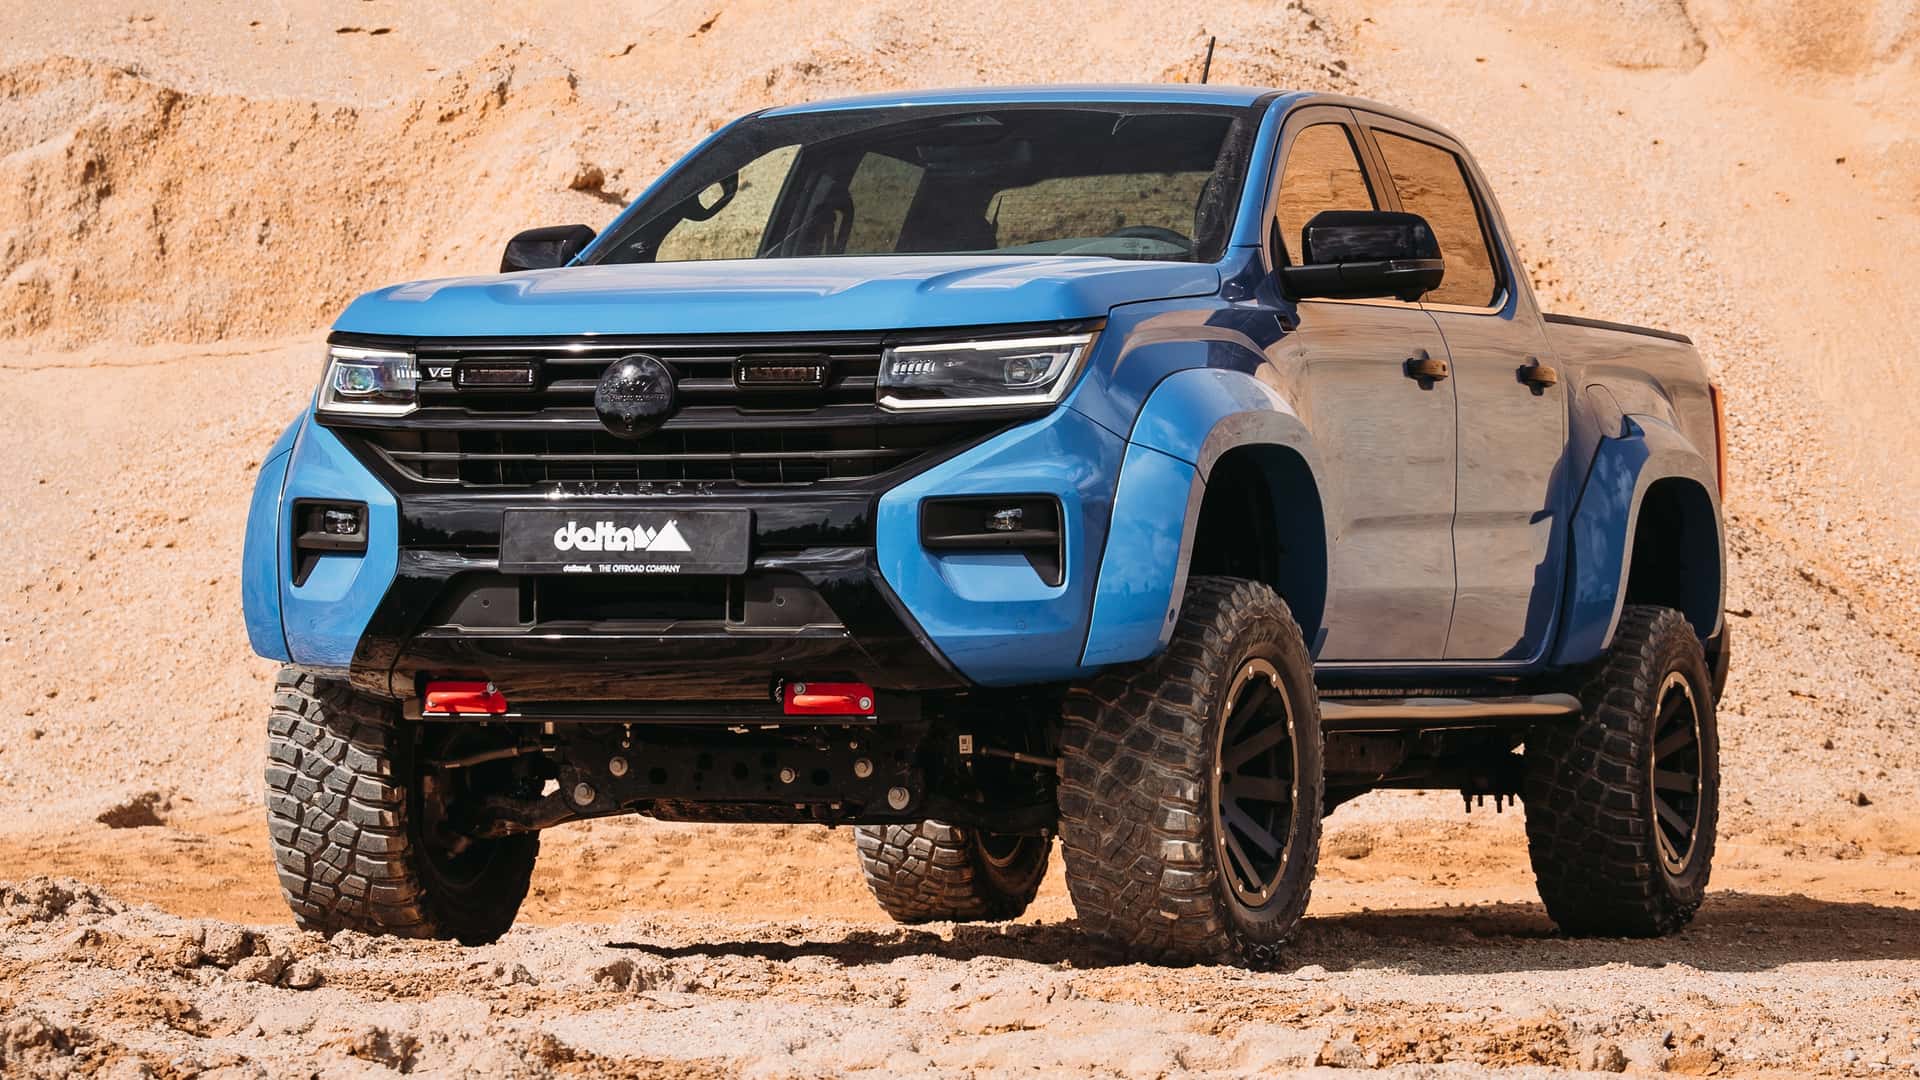 What do you make of Delta4x4's modified Volkswagen Amarok?